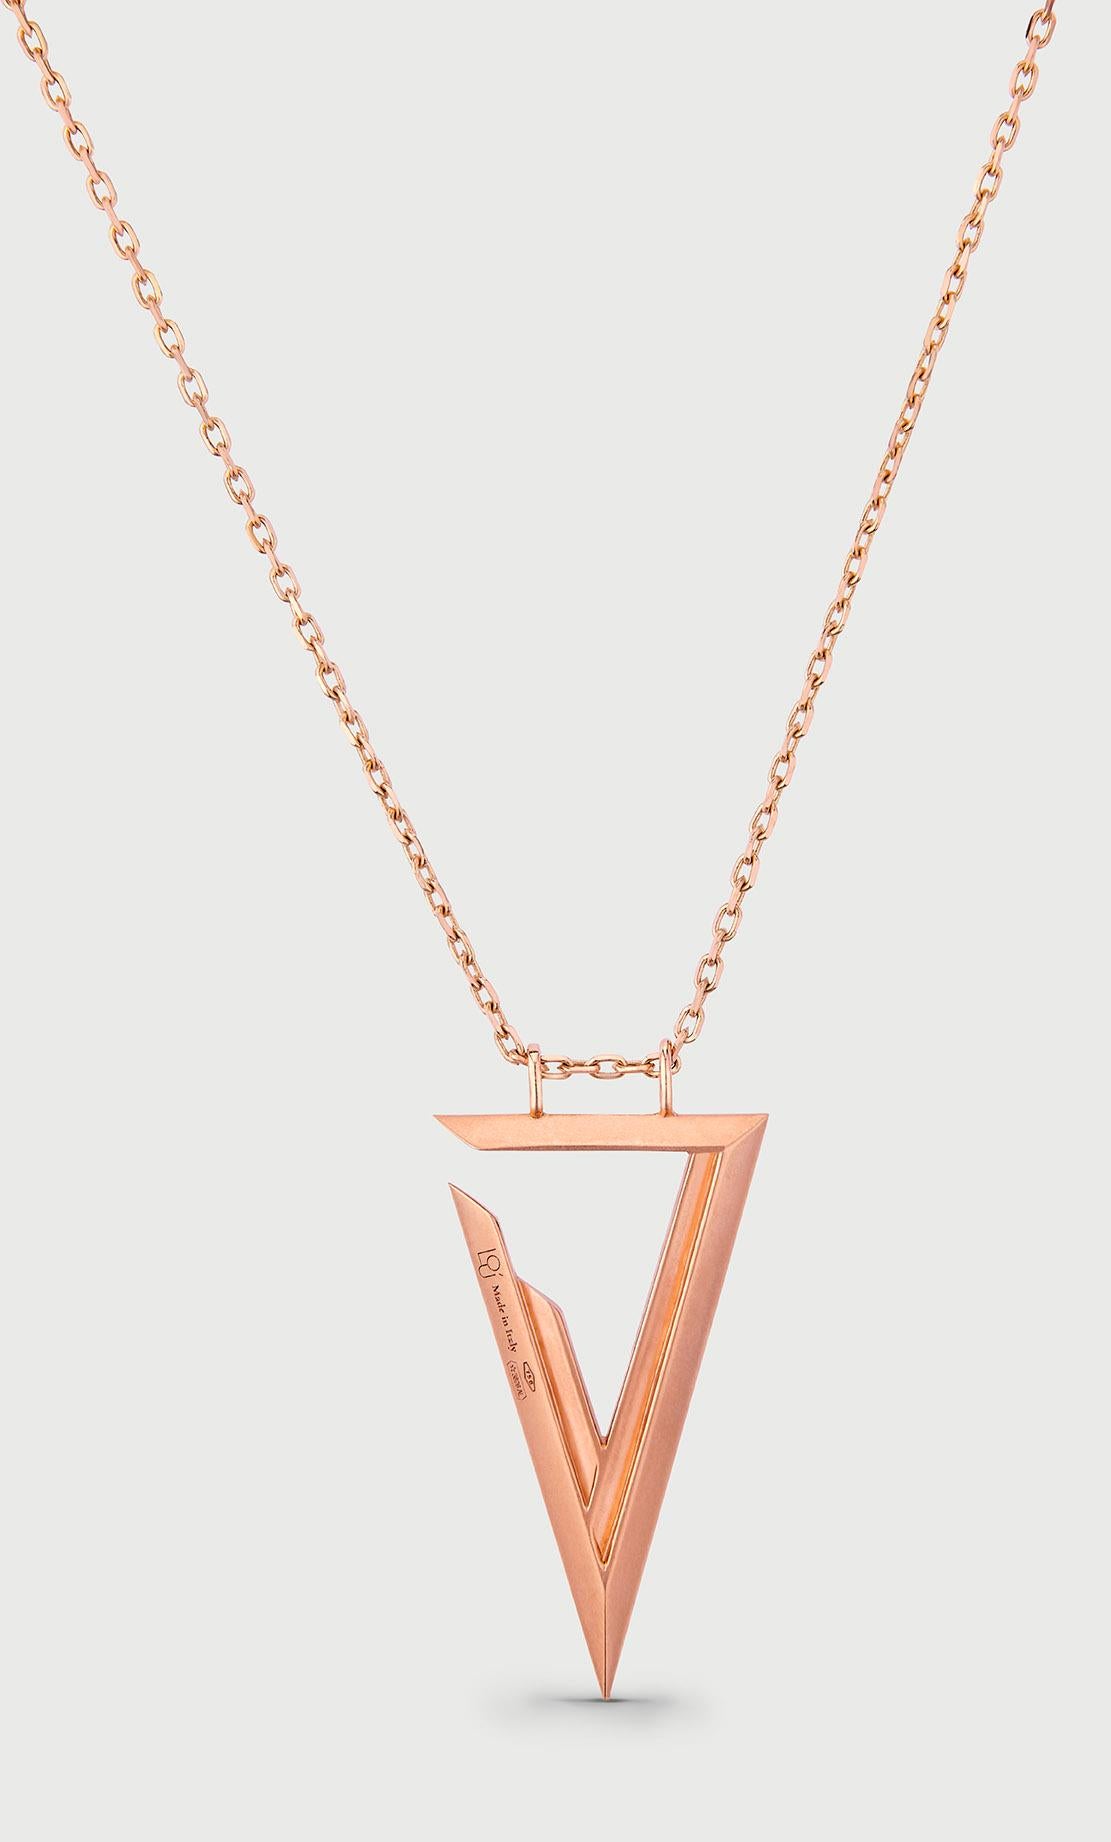 Pendant crafted in 18K Rose Gold ;  82 handset stones: White Diamonds 0.31 ct.  18K Rose Gold 4.14 gr.  Total weight with chain 6.36 gr.

Hand crafted and made in Italy. Gemstones are natural and not treated. 

Design is inspired by sacred geometry